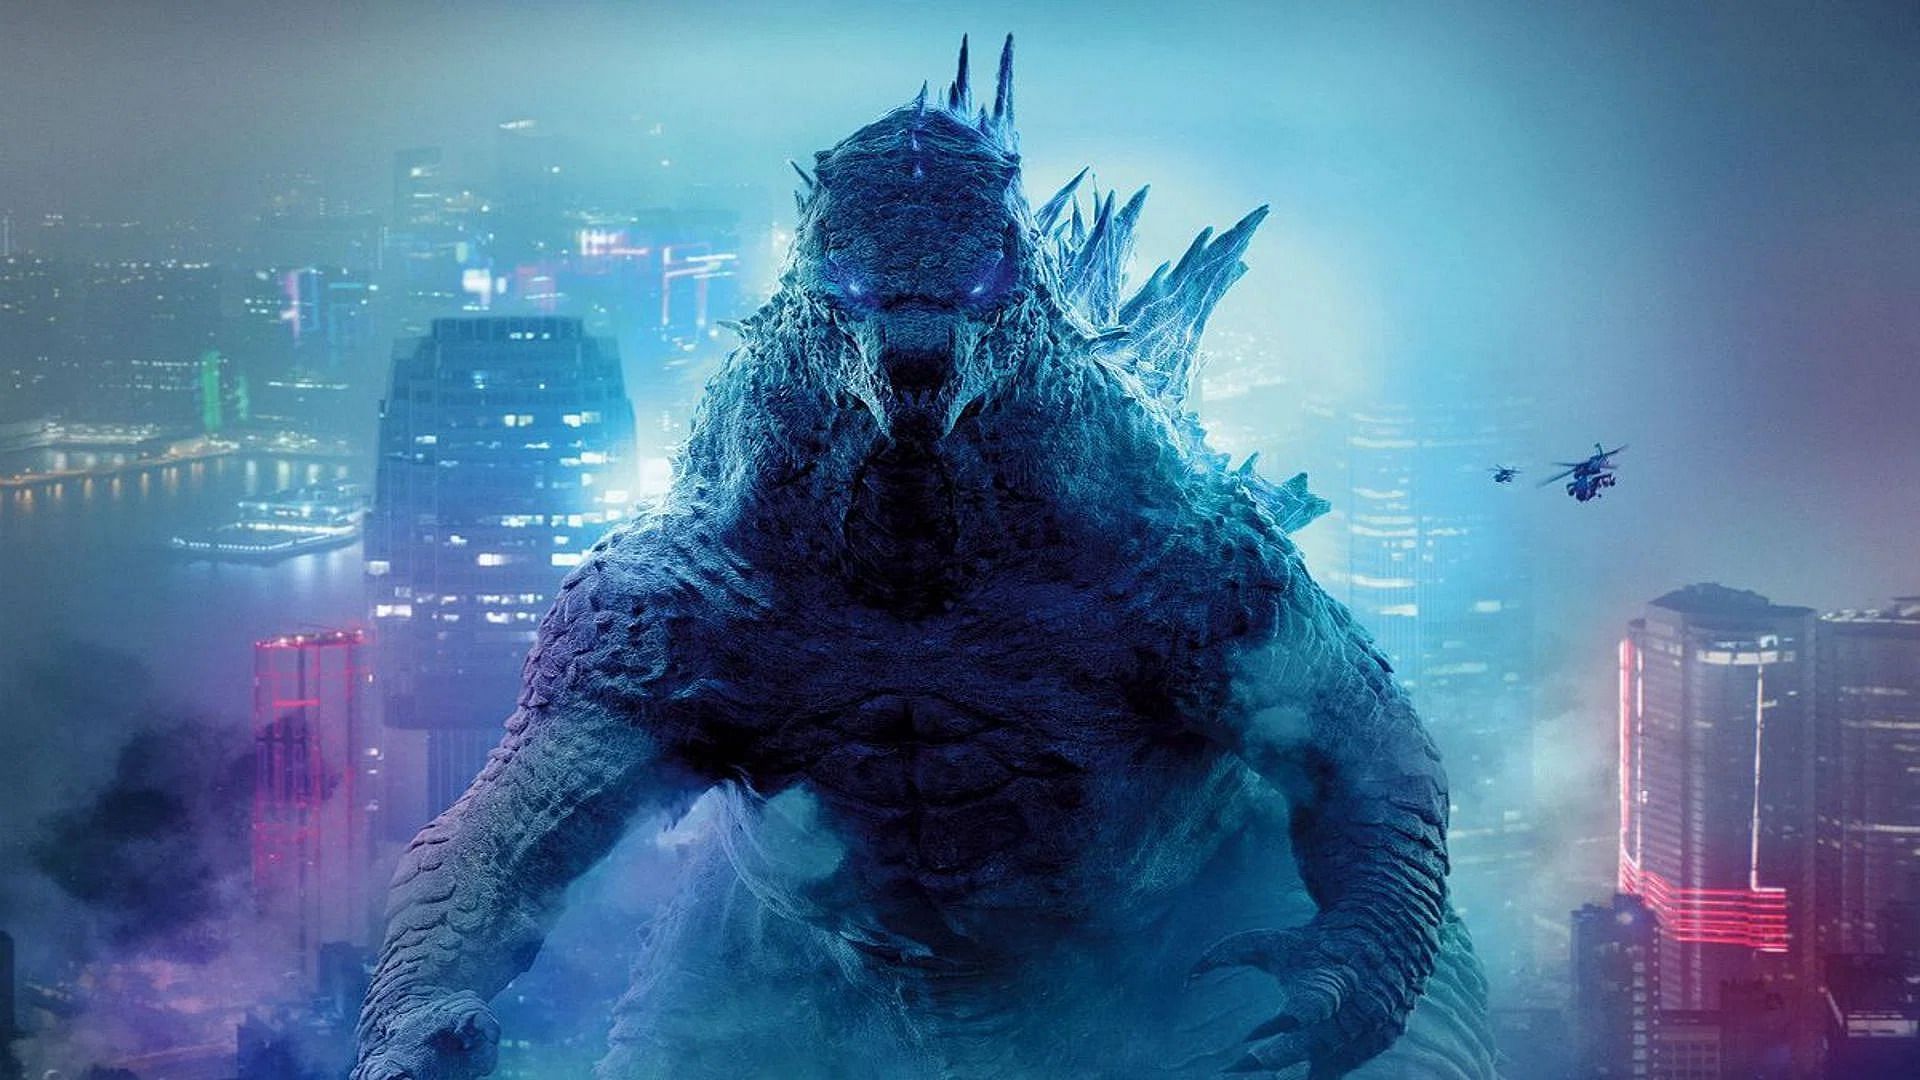 Originally an unholy child of radiation and monstrosity, Godzilla has been recast in many roles (Image via Legendary Pictures/ Warner Bros)